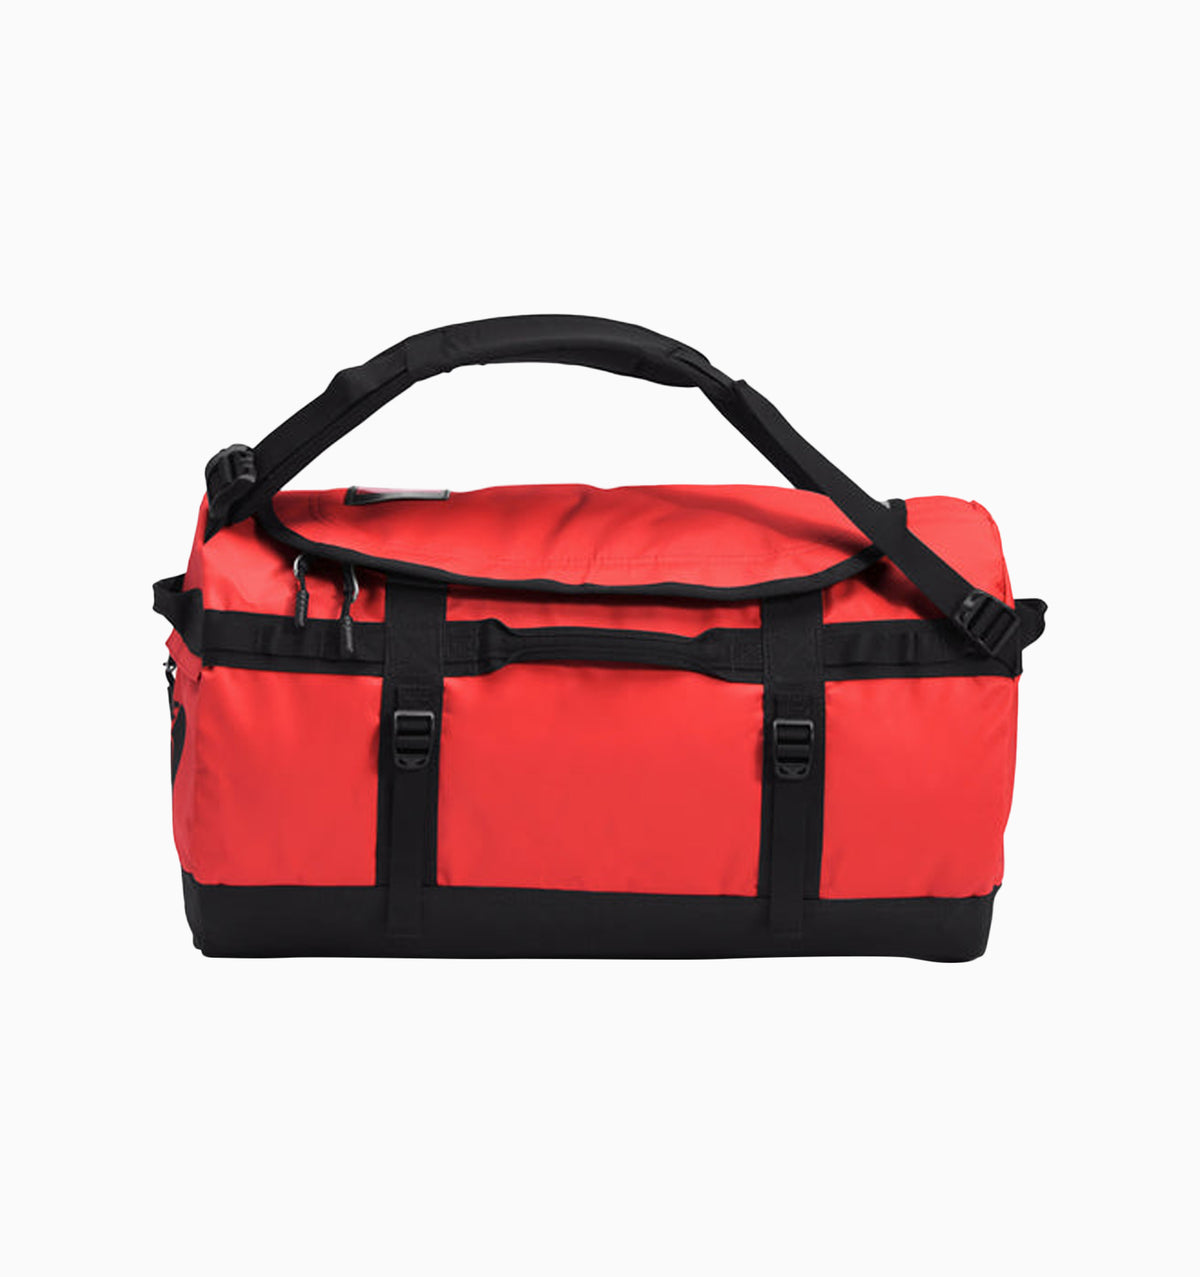 The North Face Small Base Camp Duffle 50L - 2022 Edition - Red